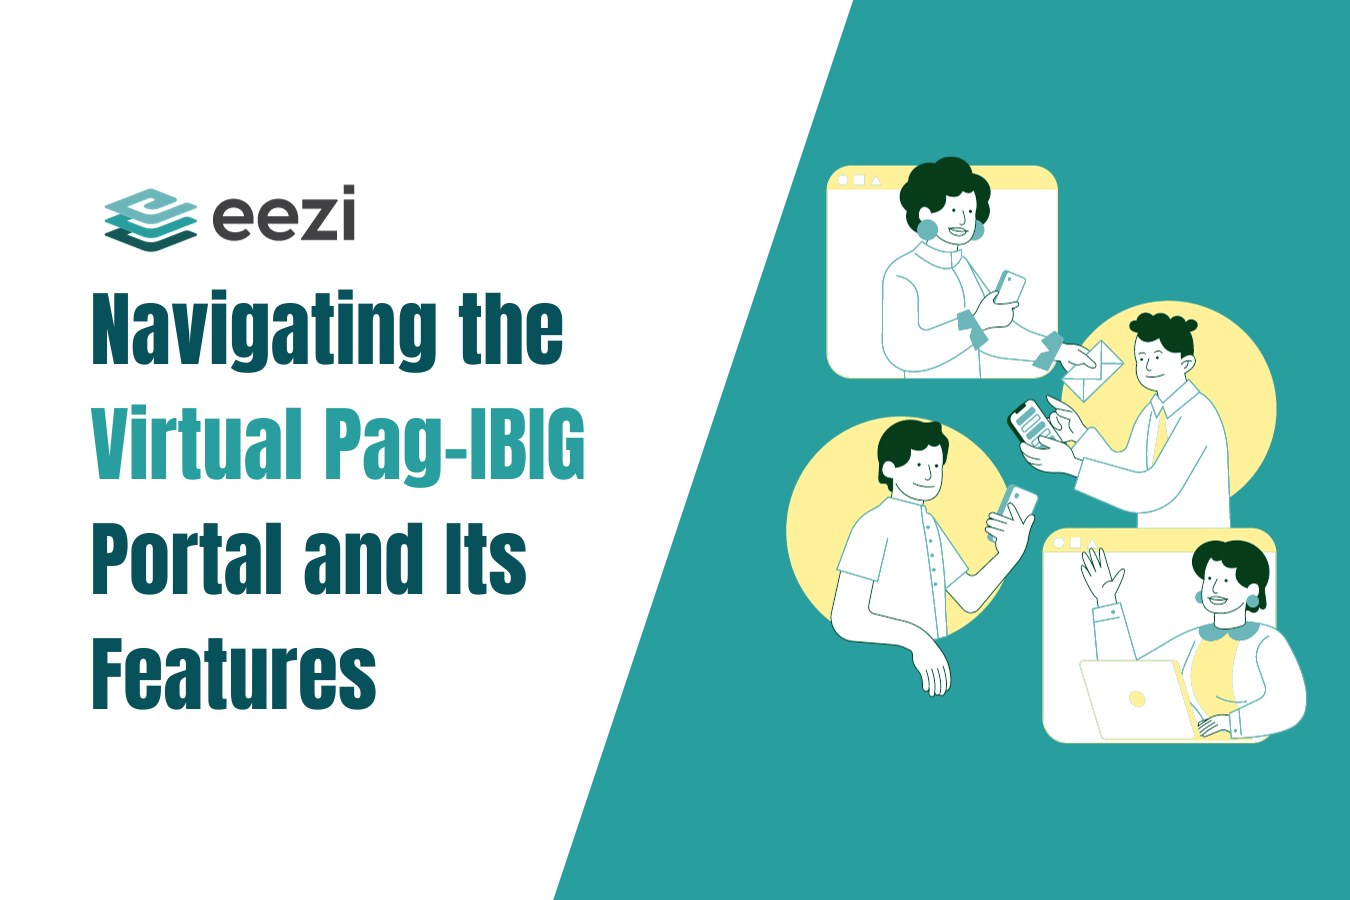 Navigating the Virtual Pag-IBIG Portal and Its Features